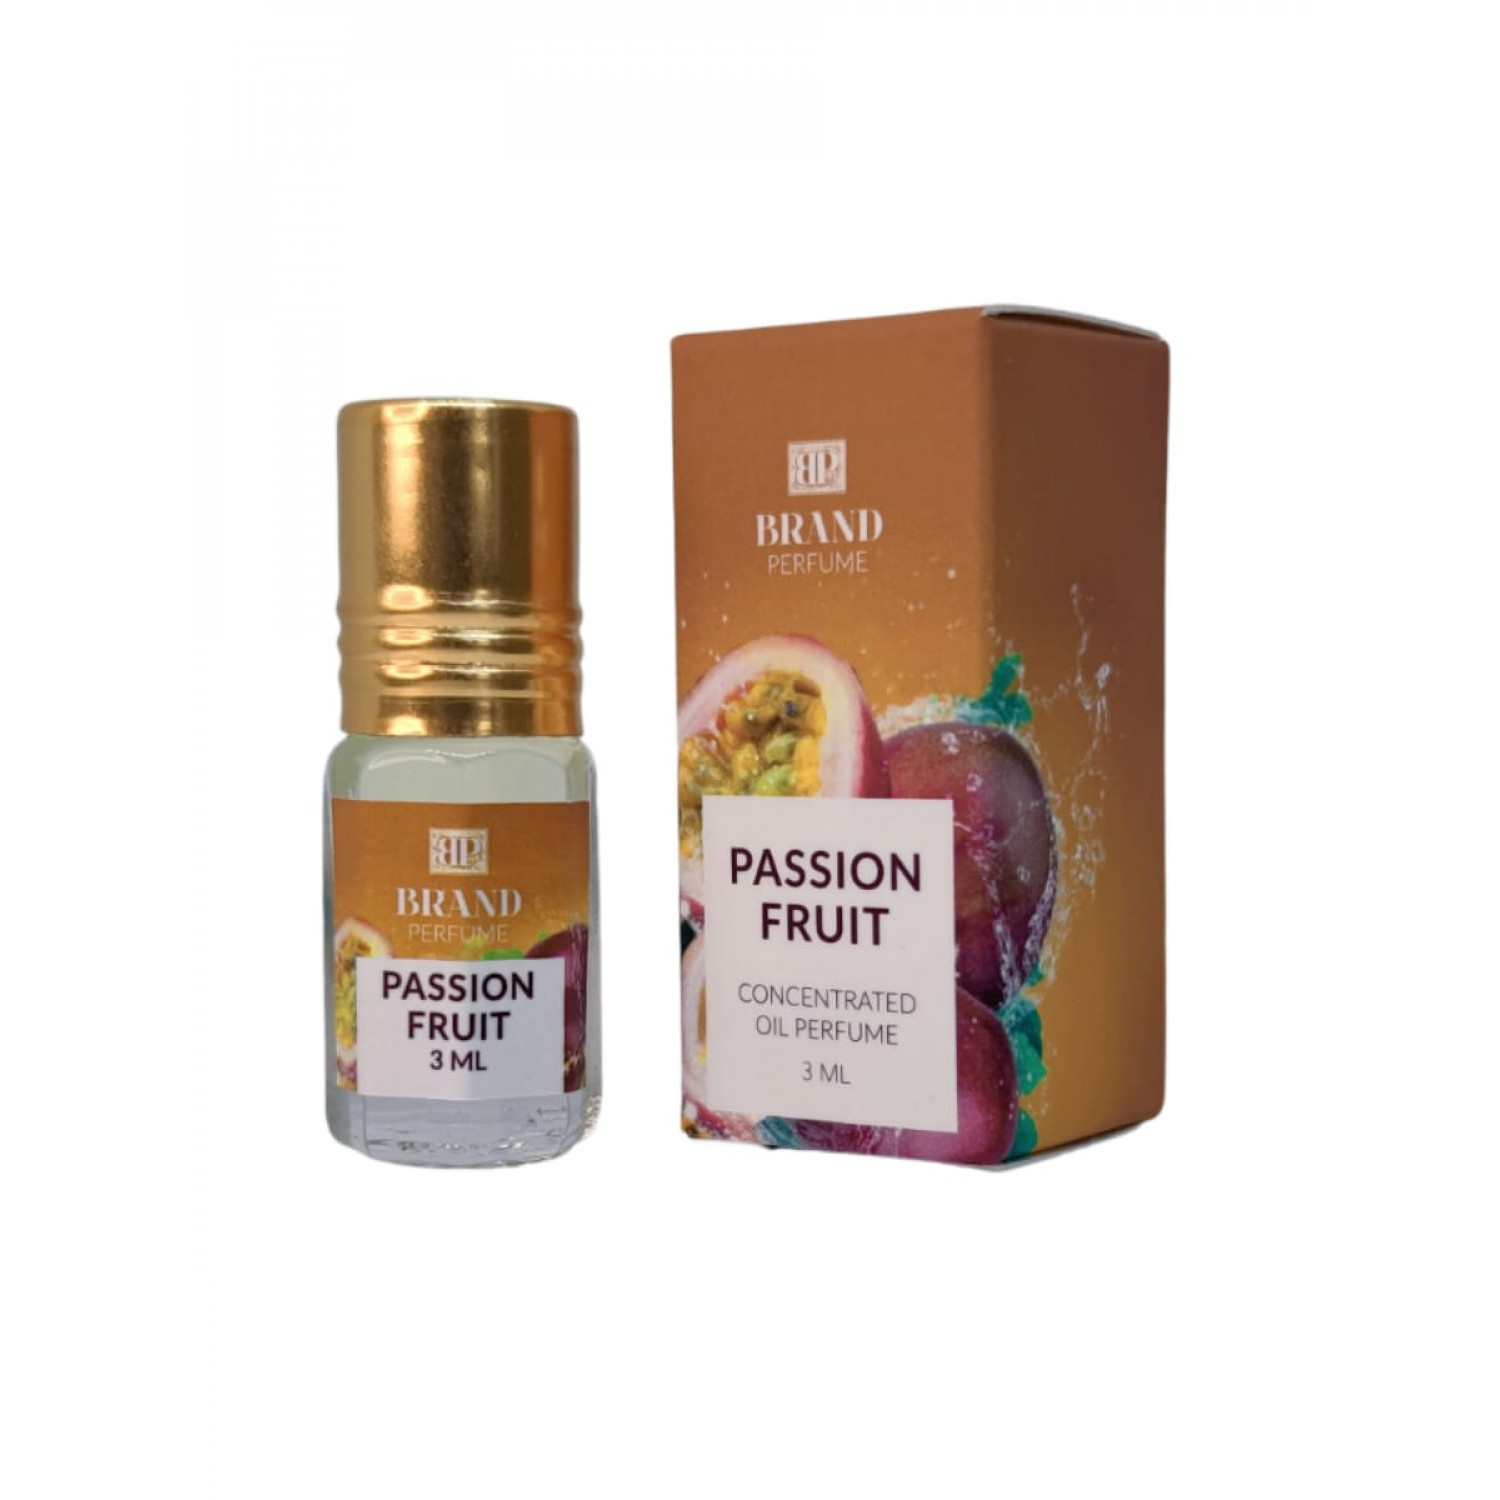 PASSION FRUIT Concentrated Oil Perfume, Brand Perfume (Концентрированные масляные духи), ролик, 3 мл.